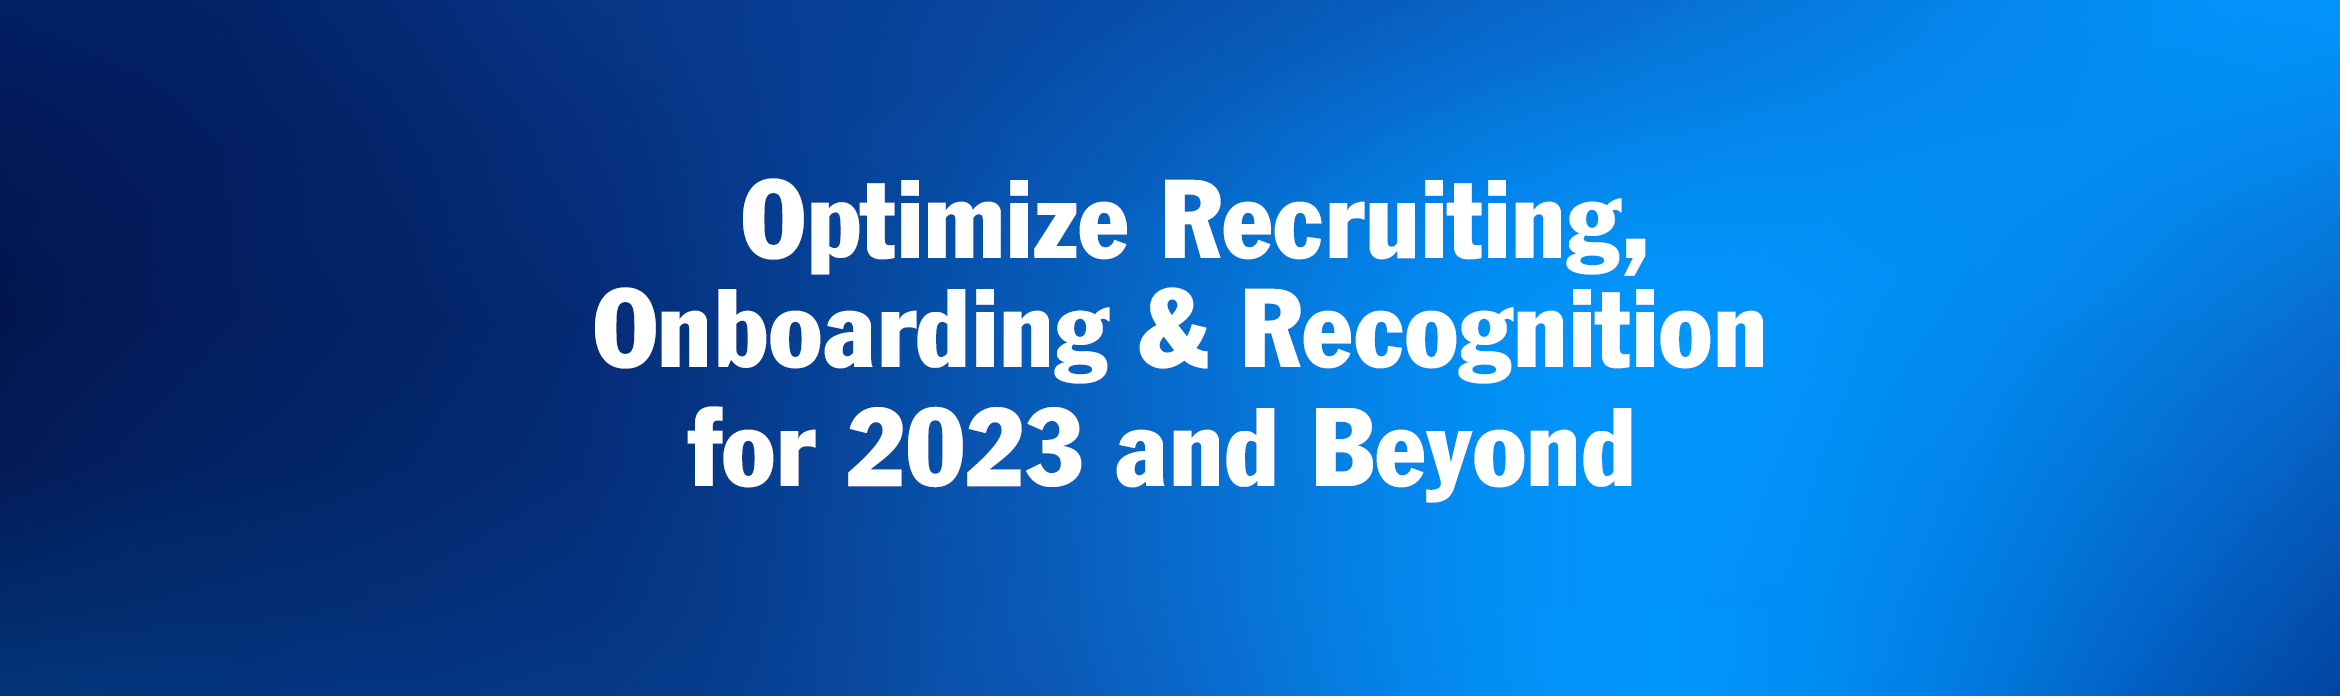 Optimize Recruiting, Onboarding and Recognition for 2023 & Beyond